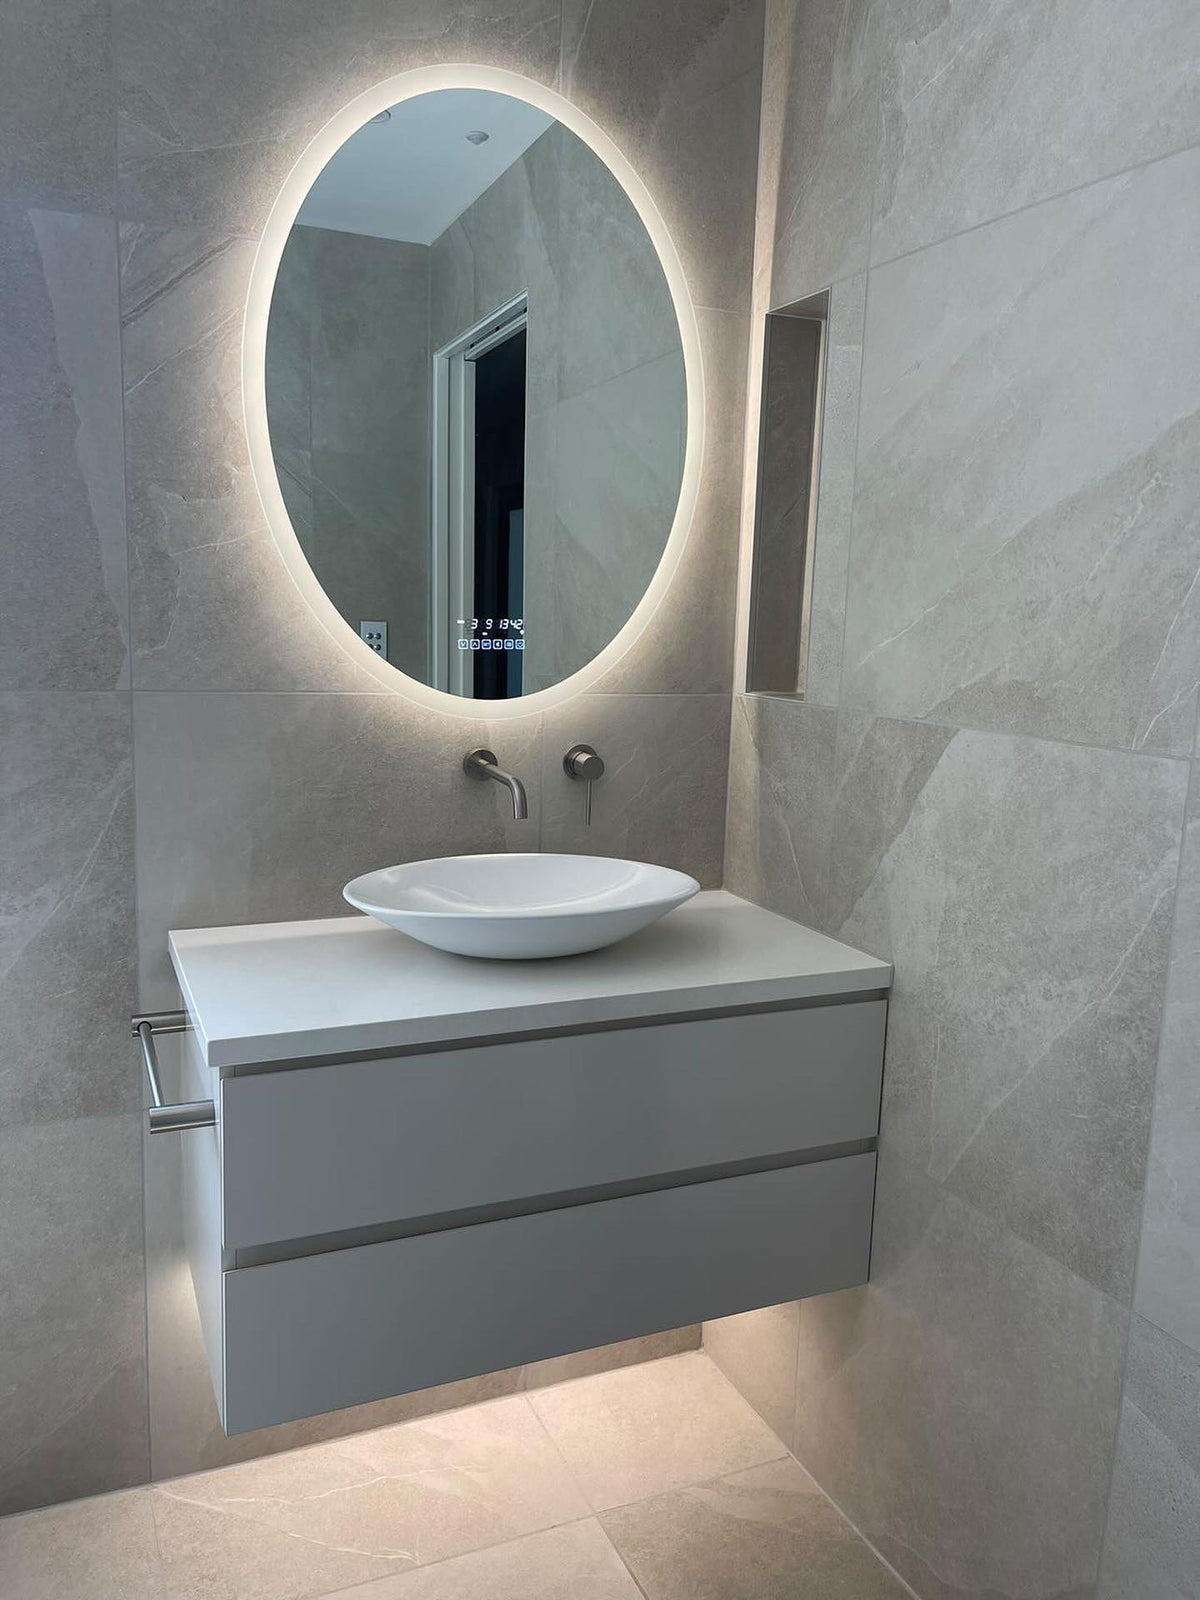 Oval Smart LED Mirror on a warm white mode in a beige and white theme bathroom